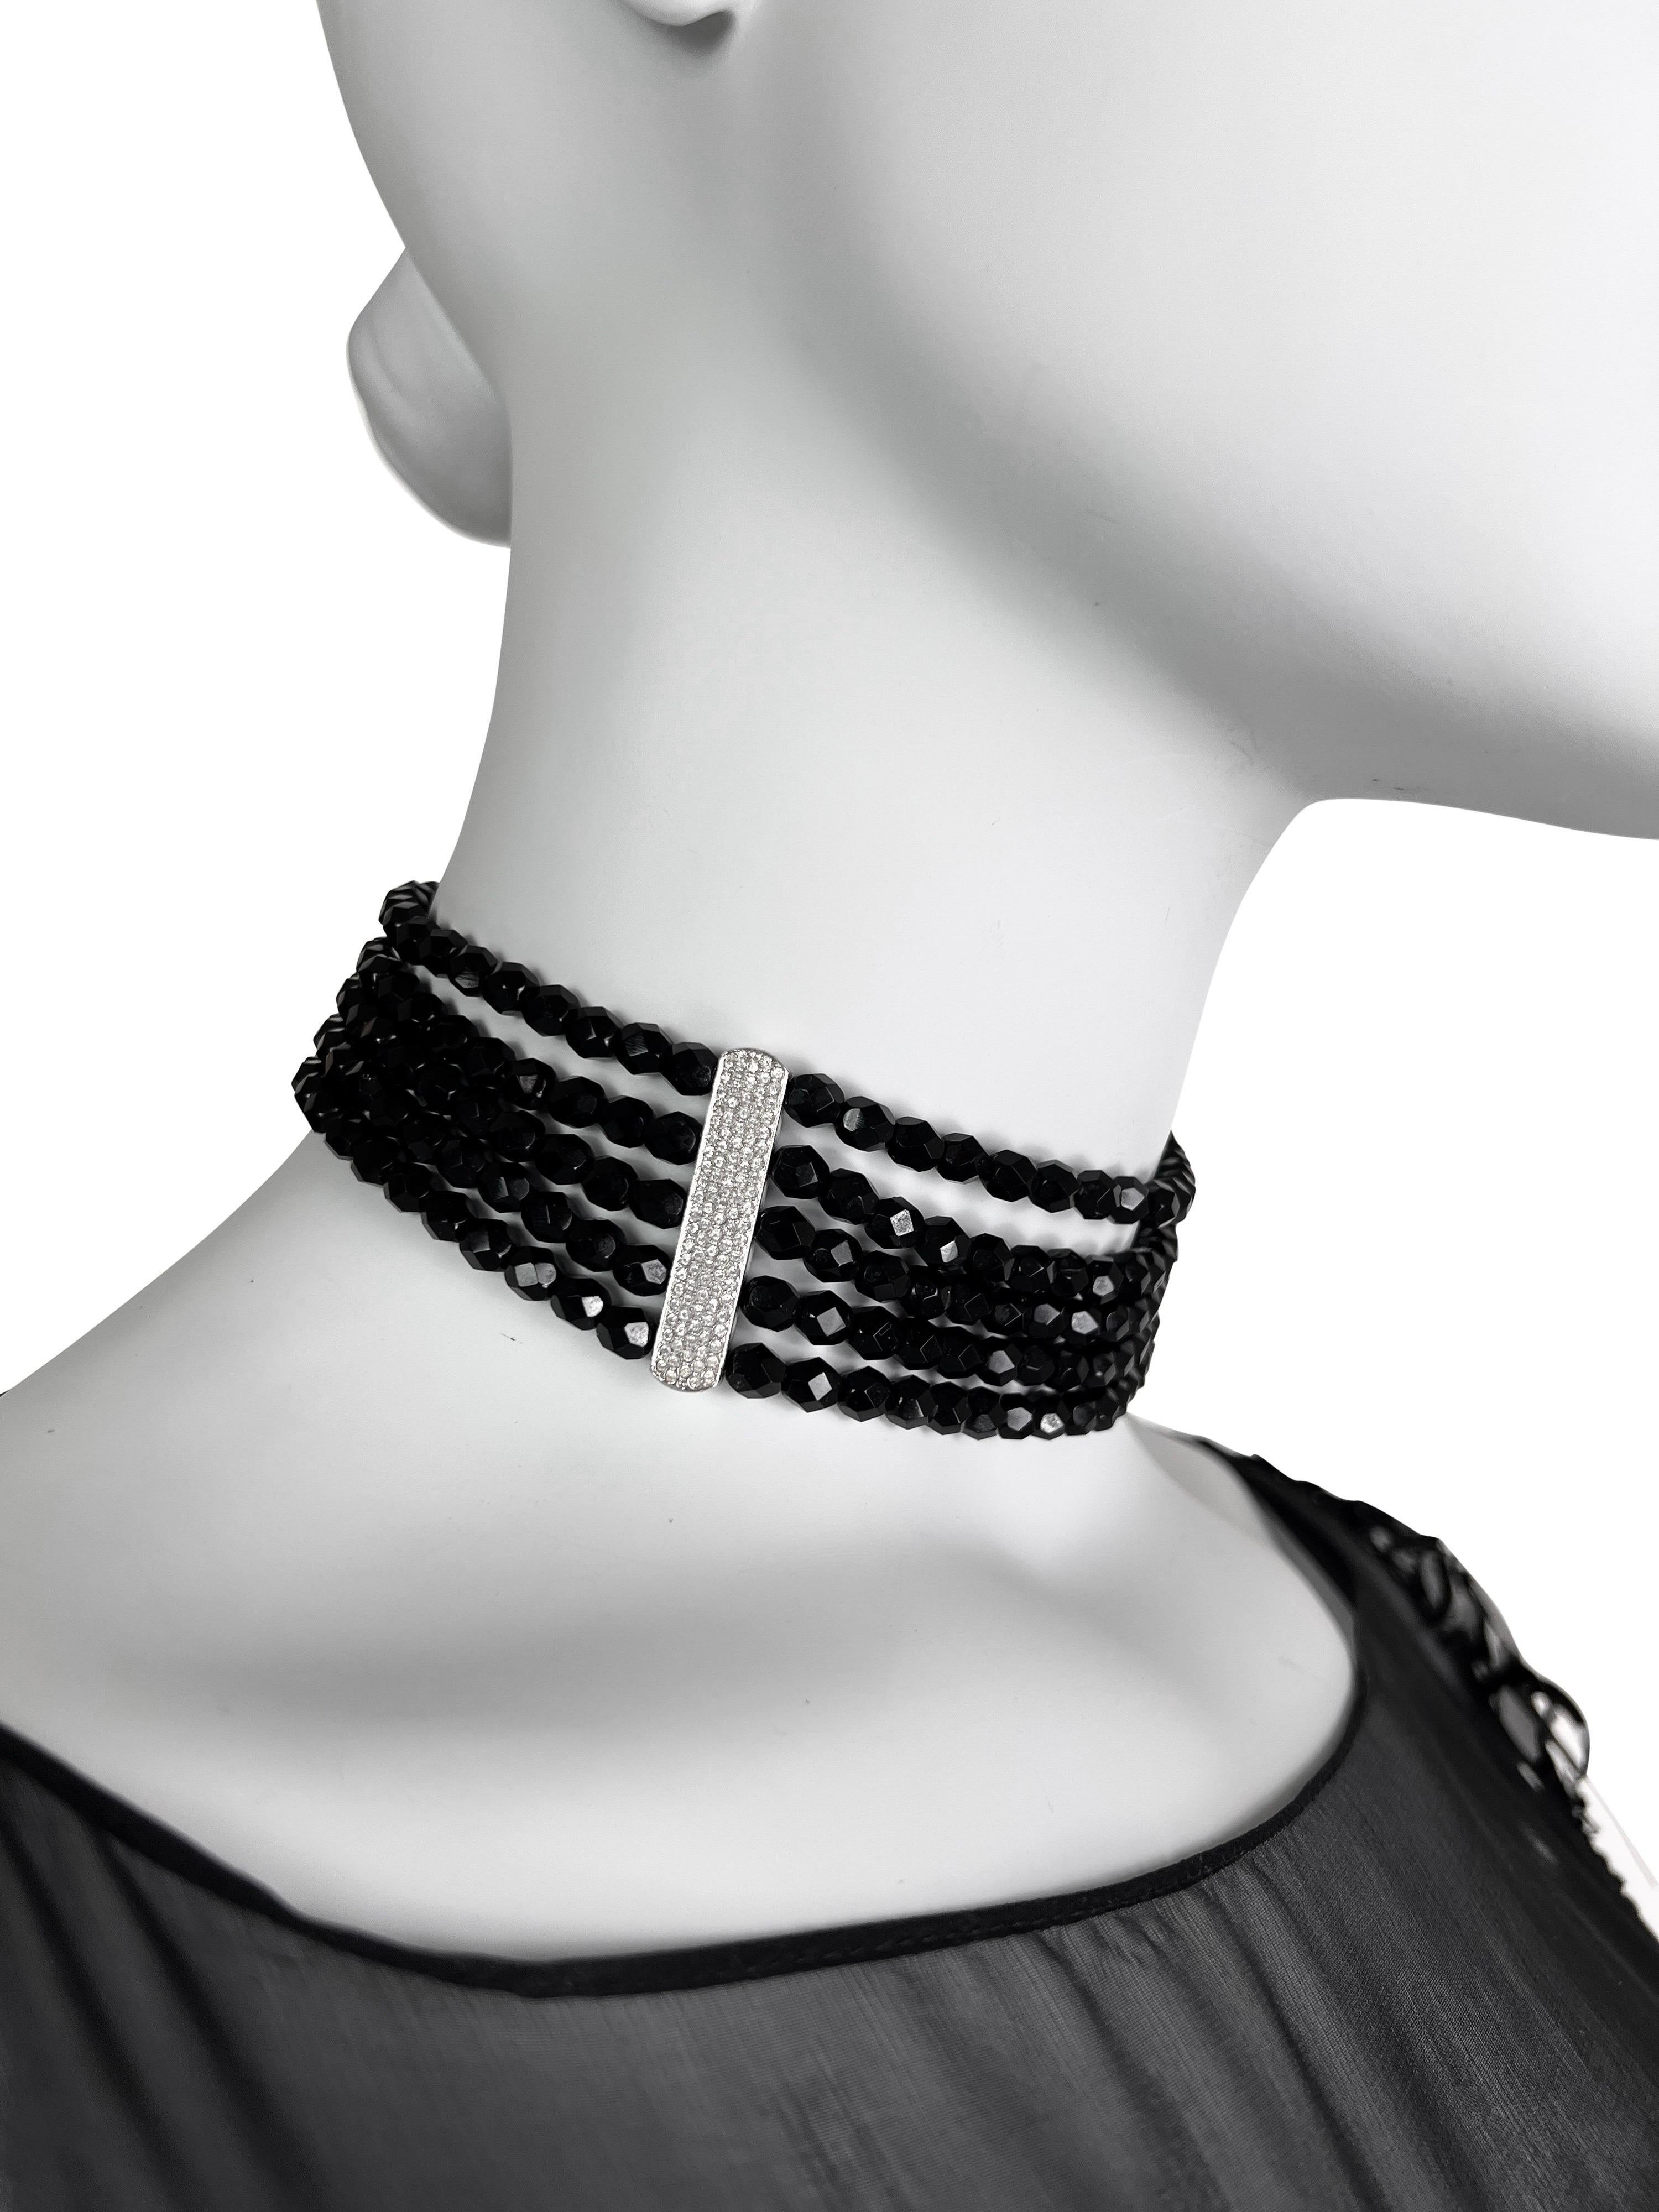 Women's Dior by John Galliano c. 1999 Multistrand Black Choker with Pavé Hardware For Sale